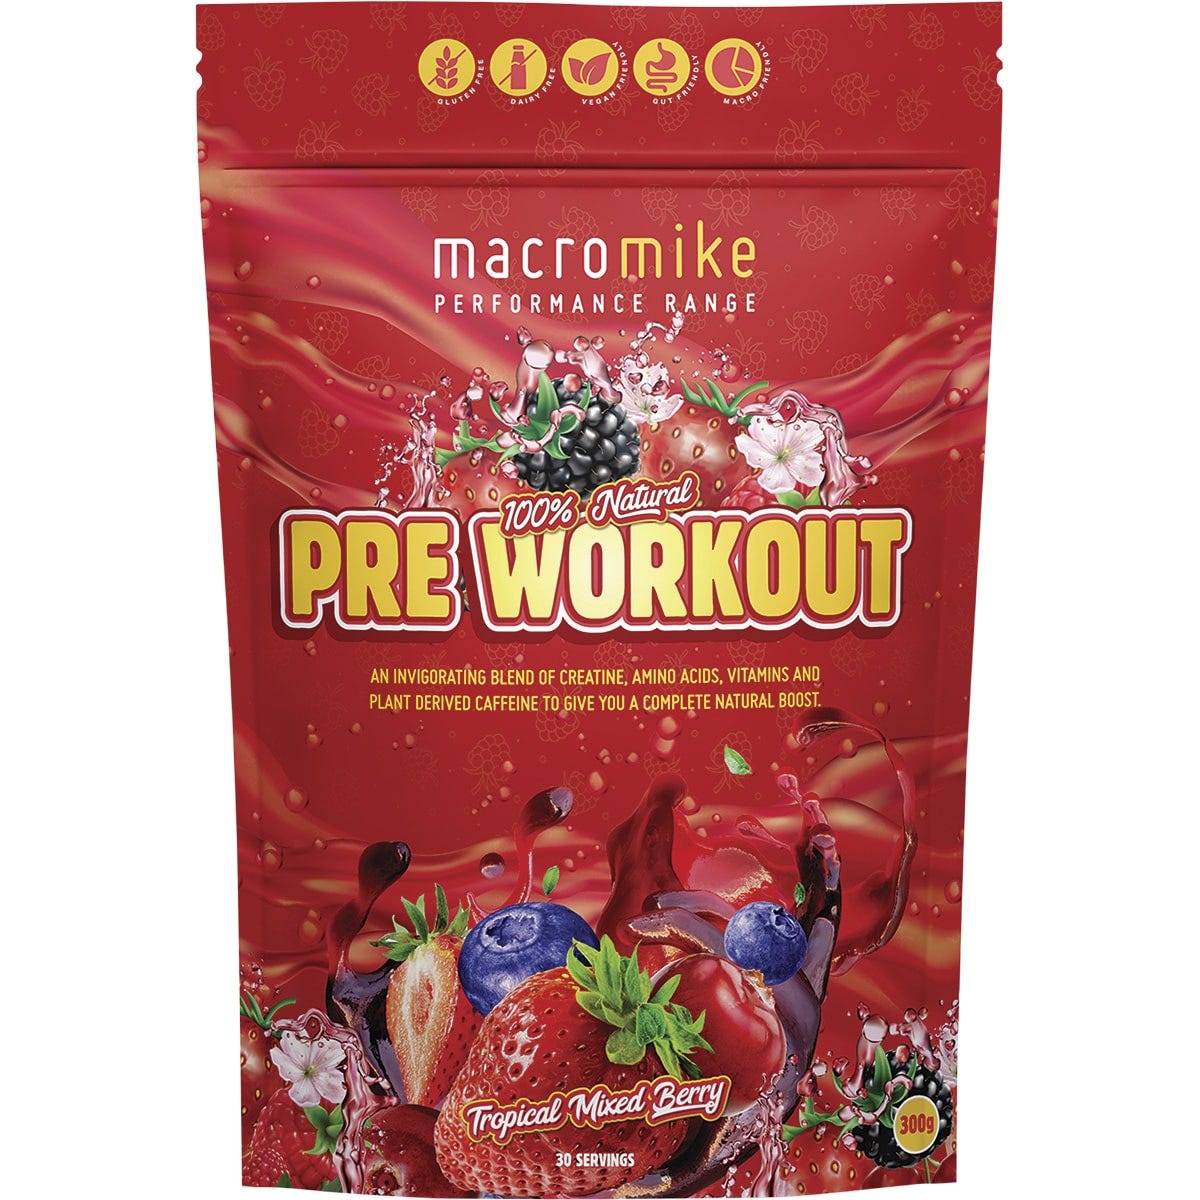 MACRO MIKE Pre Workout Tropical Mixed Berry 300g - Dr Earth - Nutrition